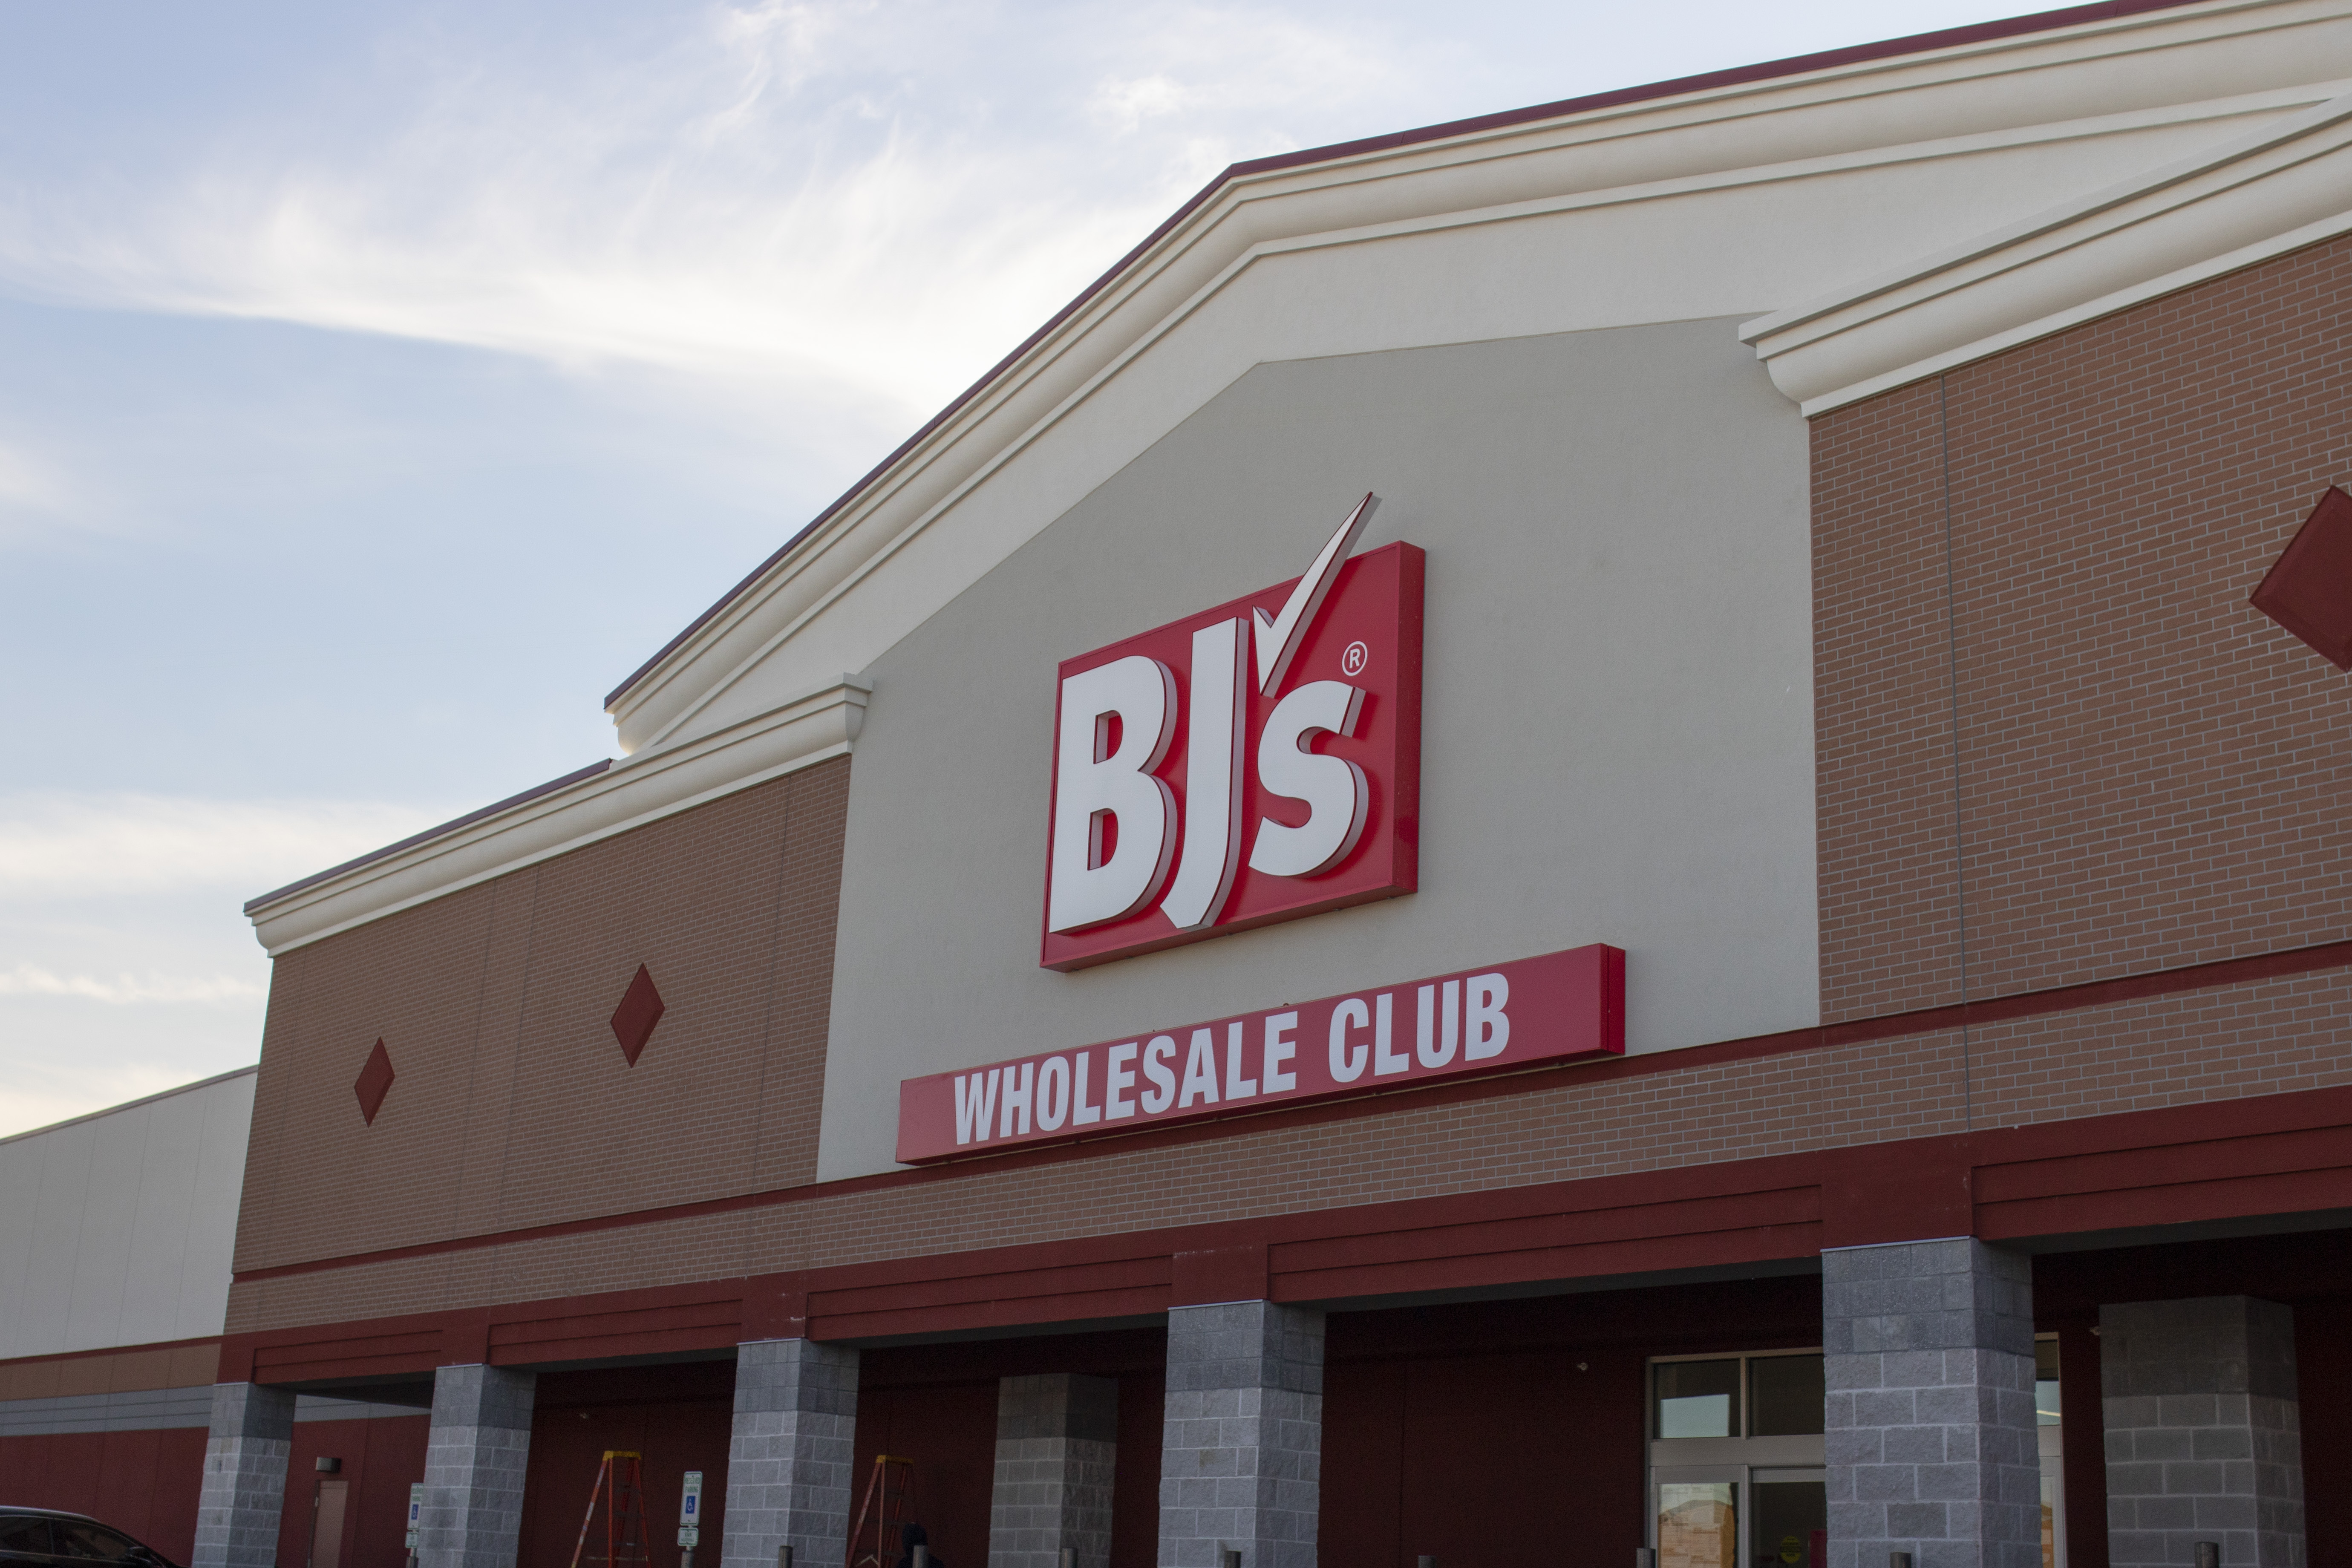 Bj S Wholesale Club Opens Newest Club In Long Island City N Y Business Wire